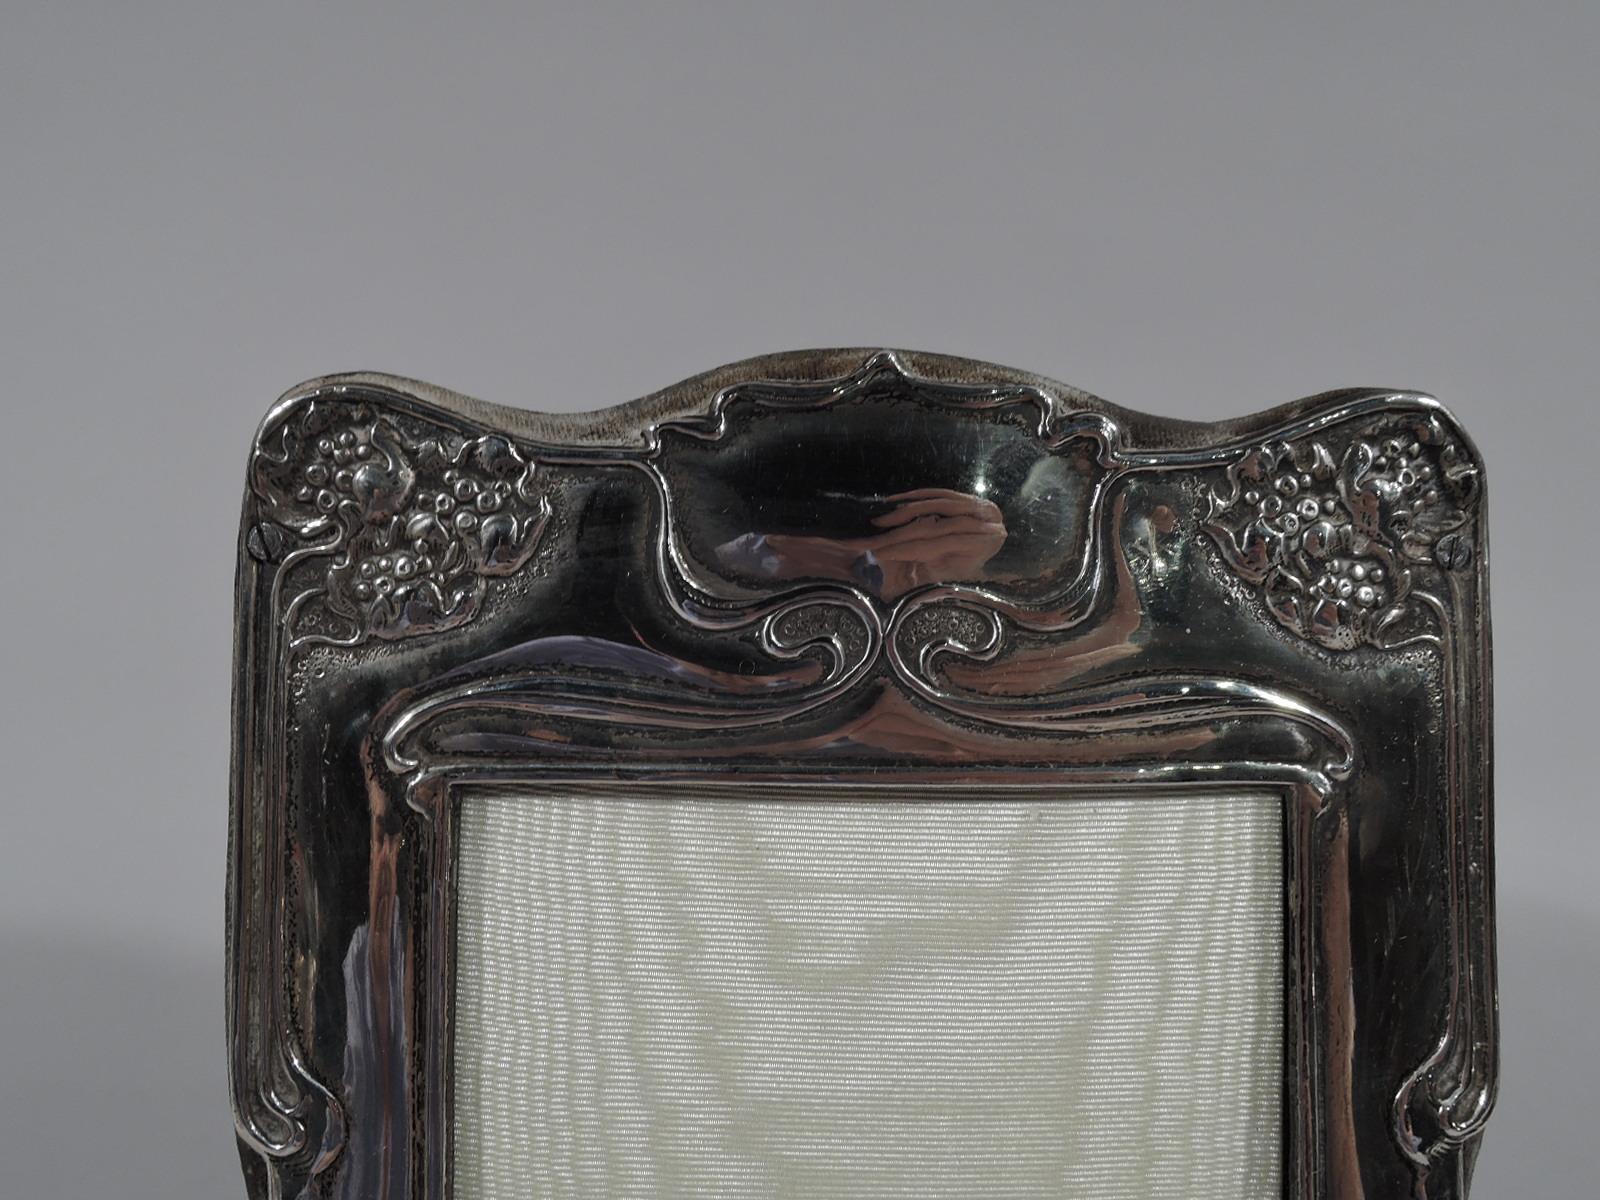 Turn-of-the-century Art Nouveau sterling silver picture frame. Made by Dominick & Haff in New York. Rectangular window in shaped surround with bracket feet. In English Liberty style with raised symmetrical ornament with whiplash lines, tendrils, and